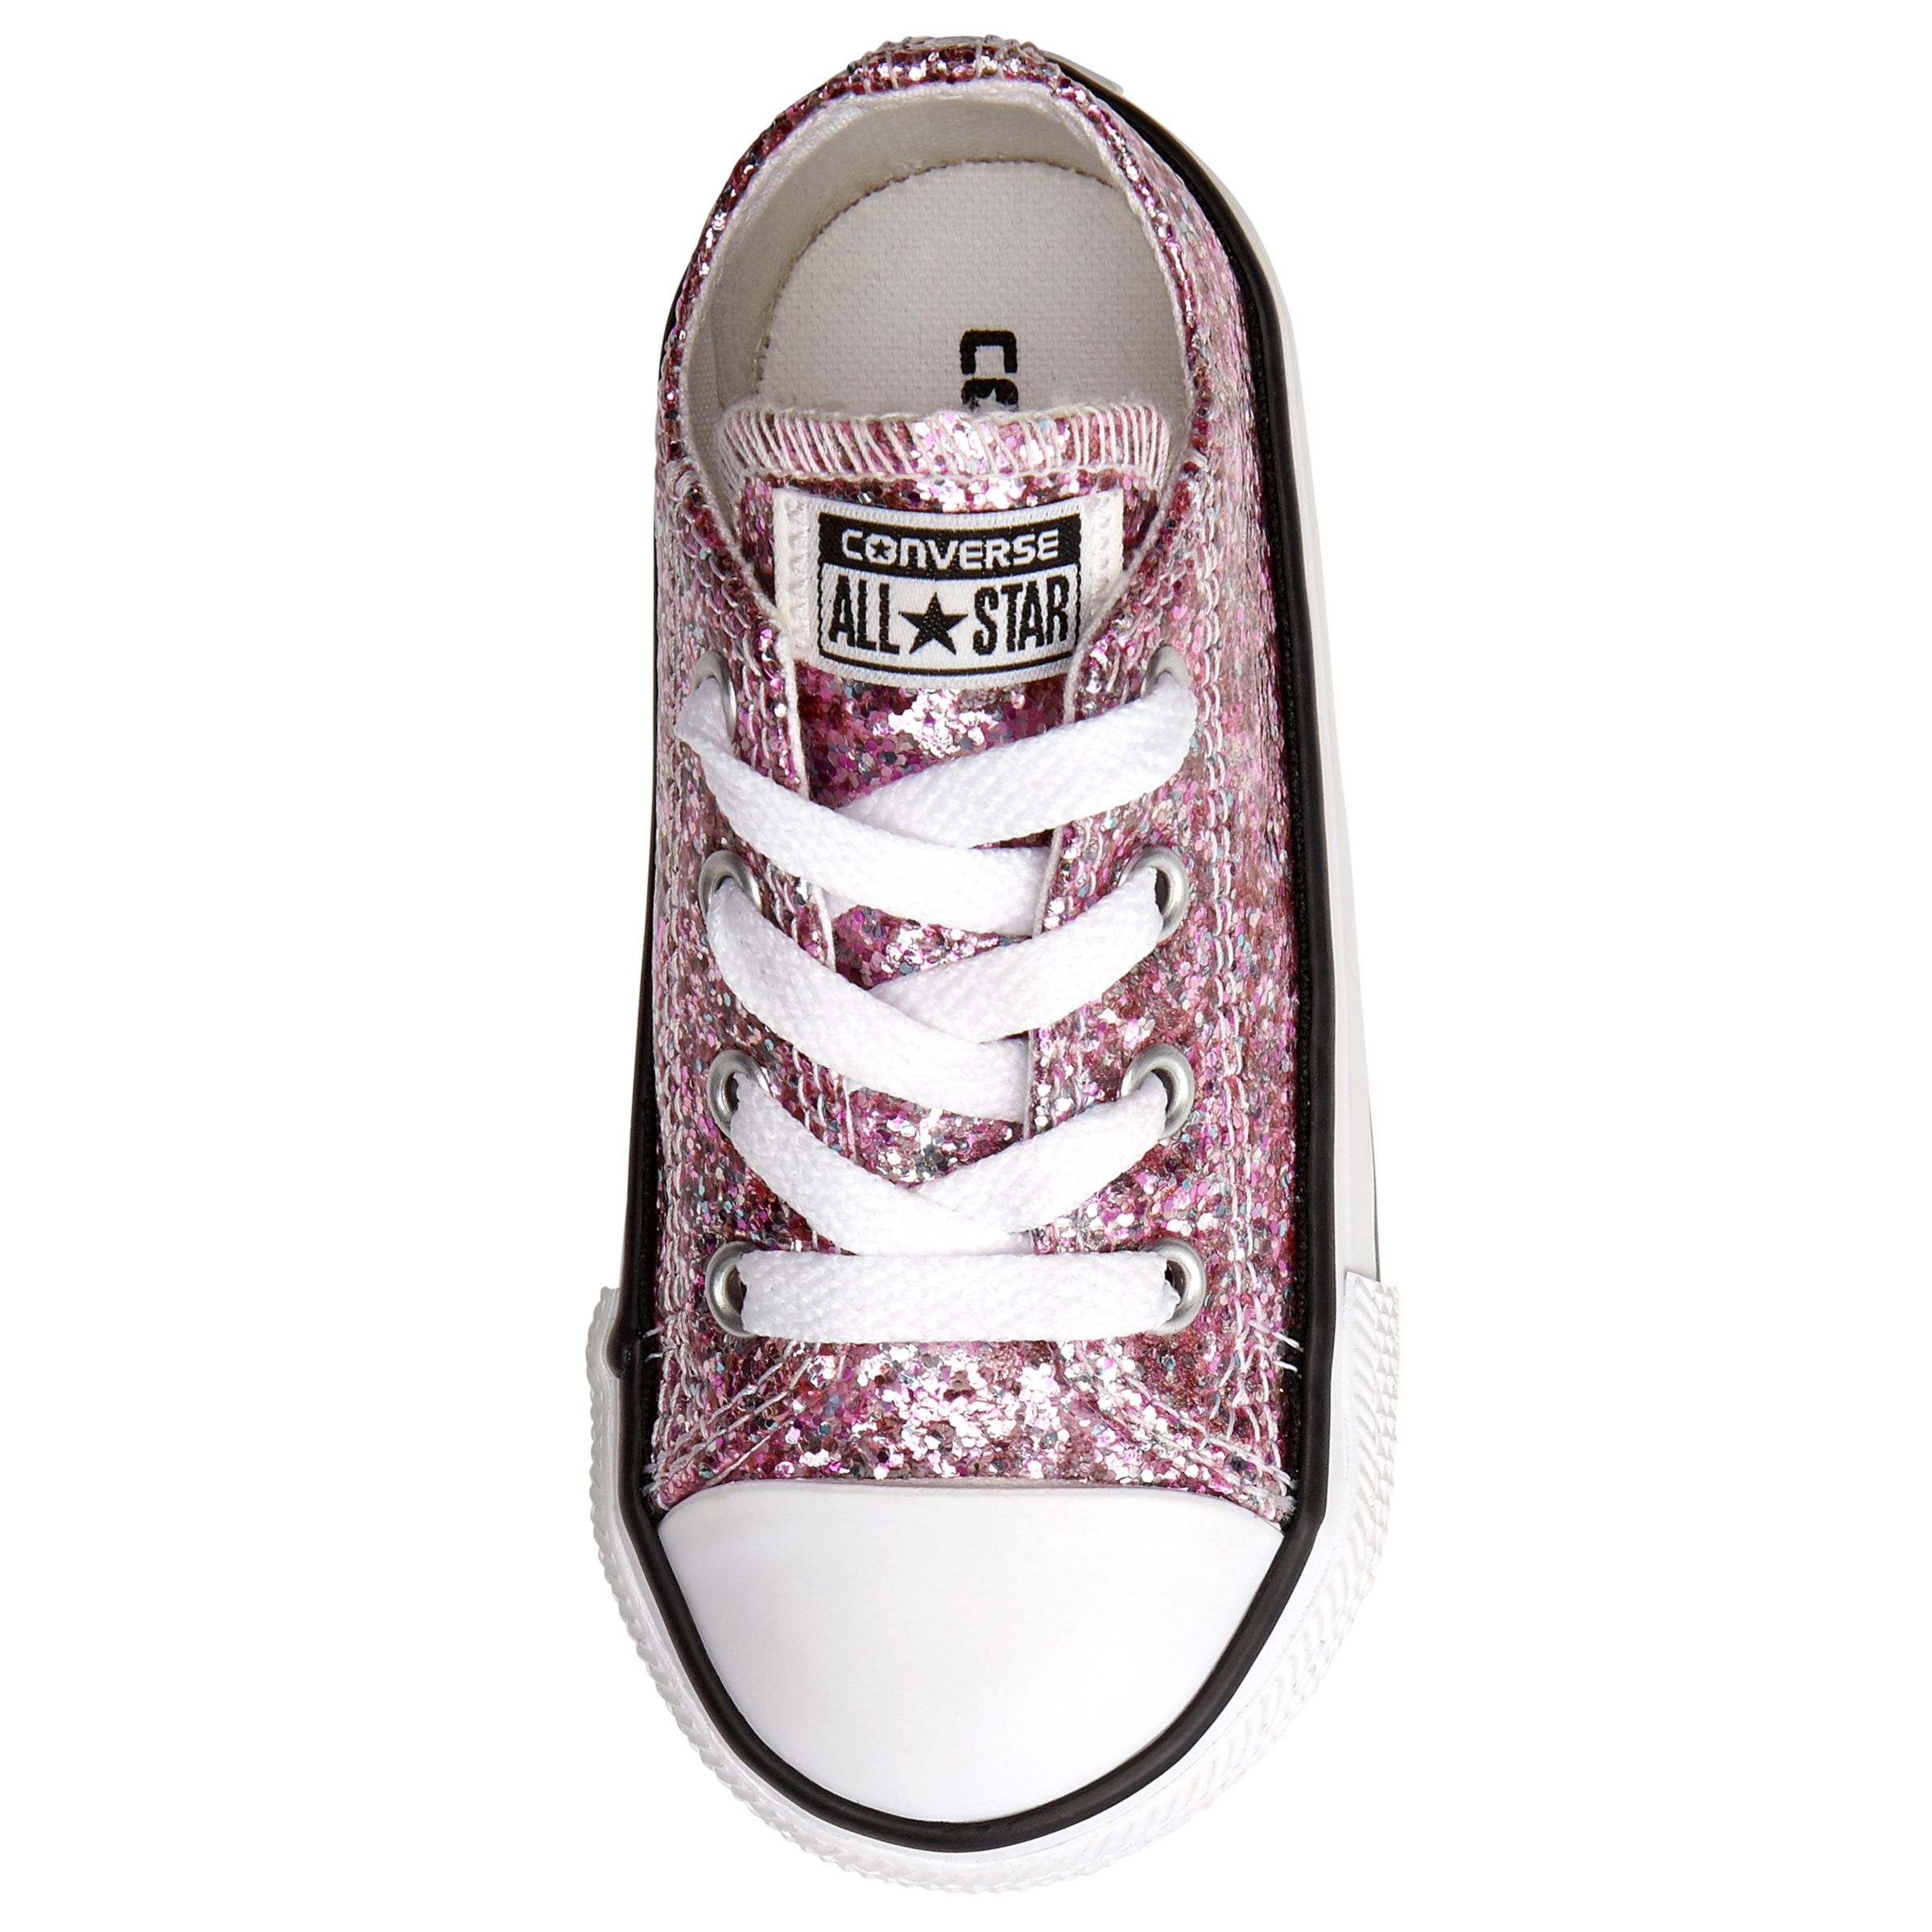 Star Lace Up Shoes, Pink Glitter 